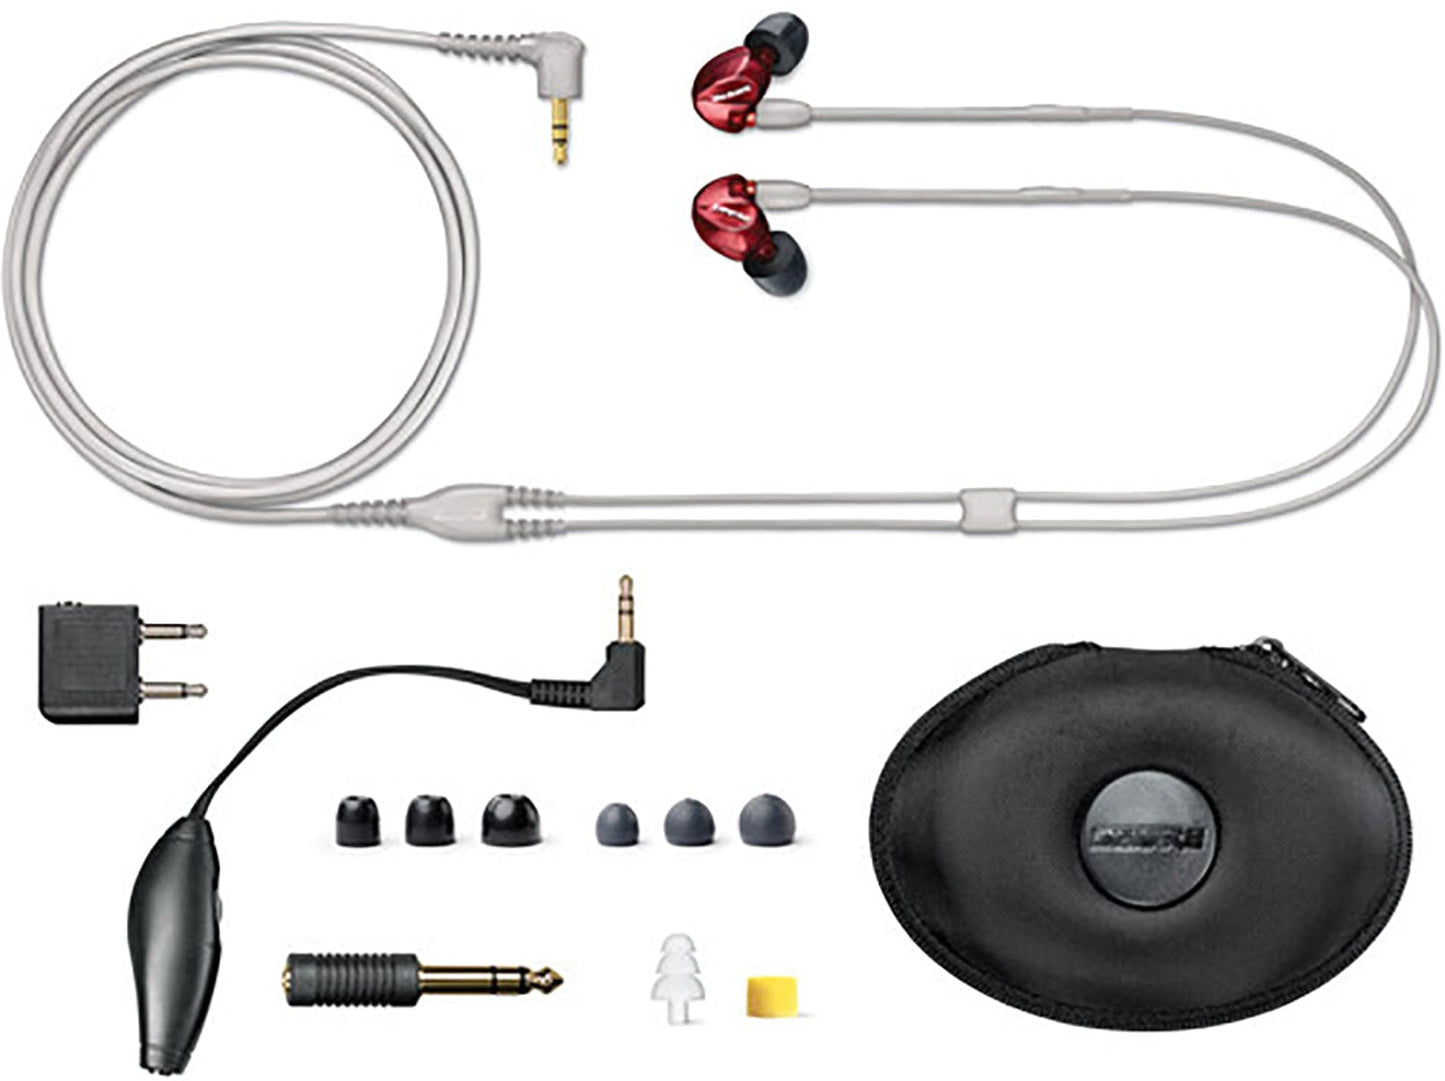 Shure SE535LTD Sound Isolating In-Ear Monitor Earphones - Red - PSSL ProSound and Stage Lighting